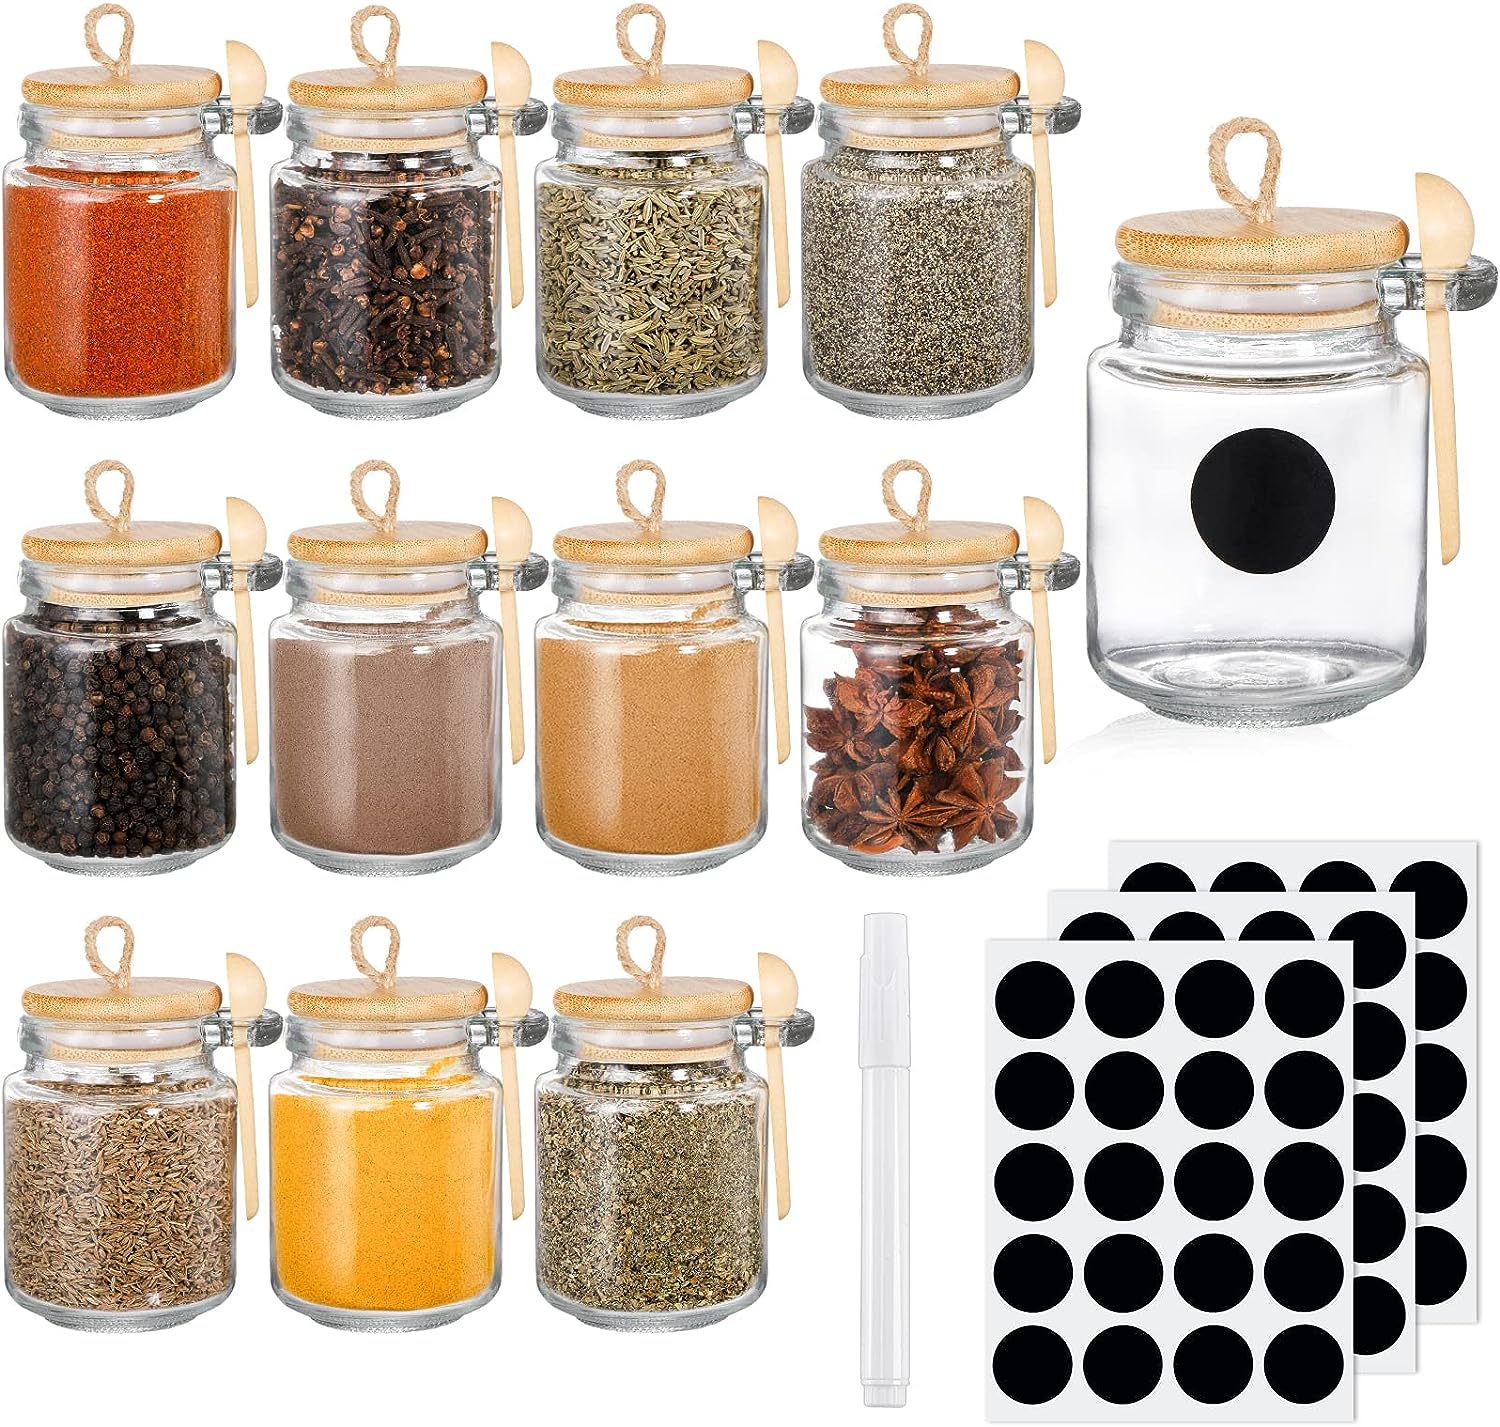 Cornucopia Mini Plastic Spice Jars w/Sifters (12-Pack); 2 Tablespoon Capacity (1 Fluid Ounce) Spice Bottles for Travel, Glitter, Gifts, Favors Red